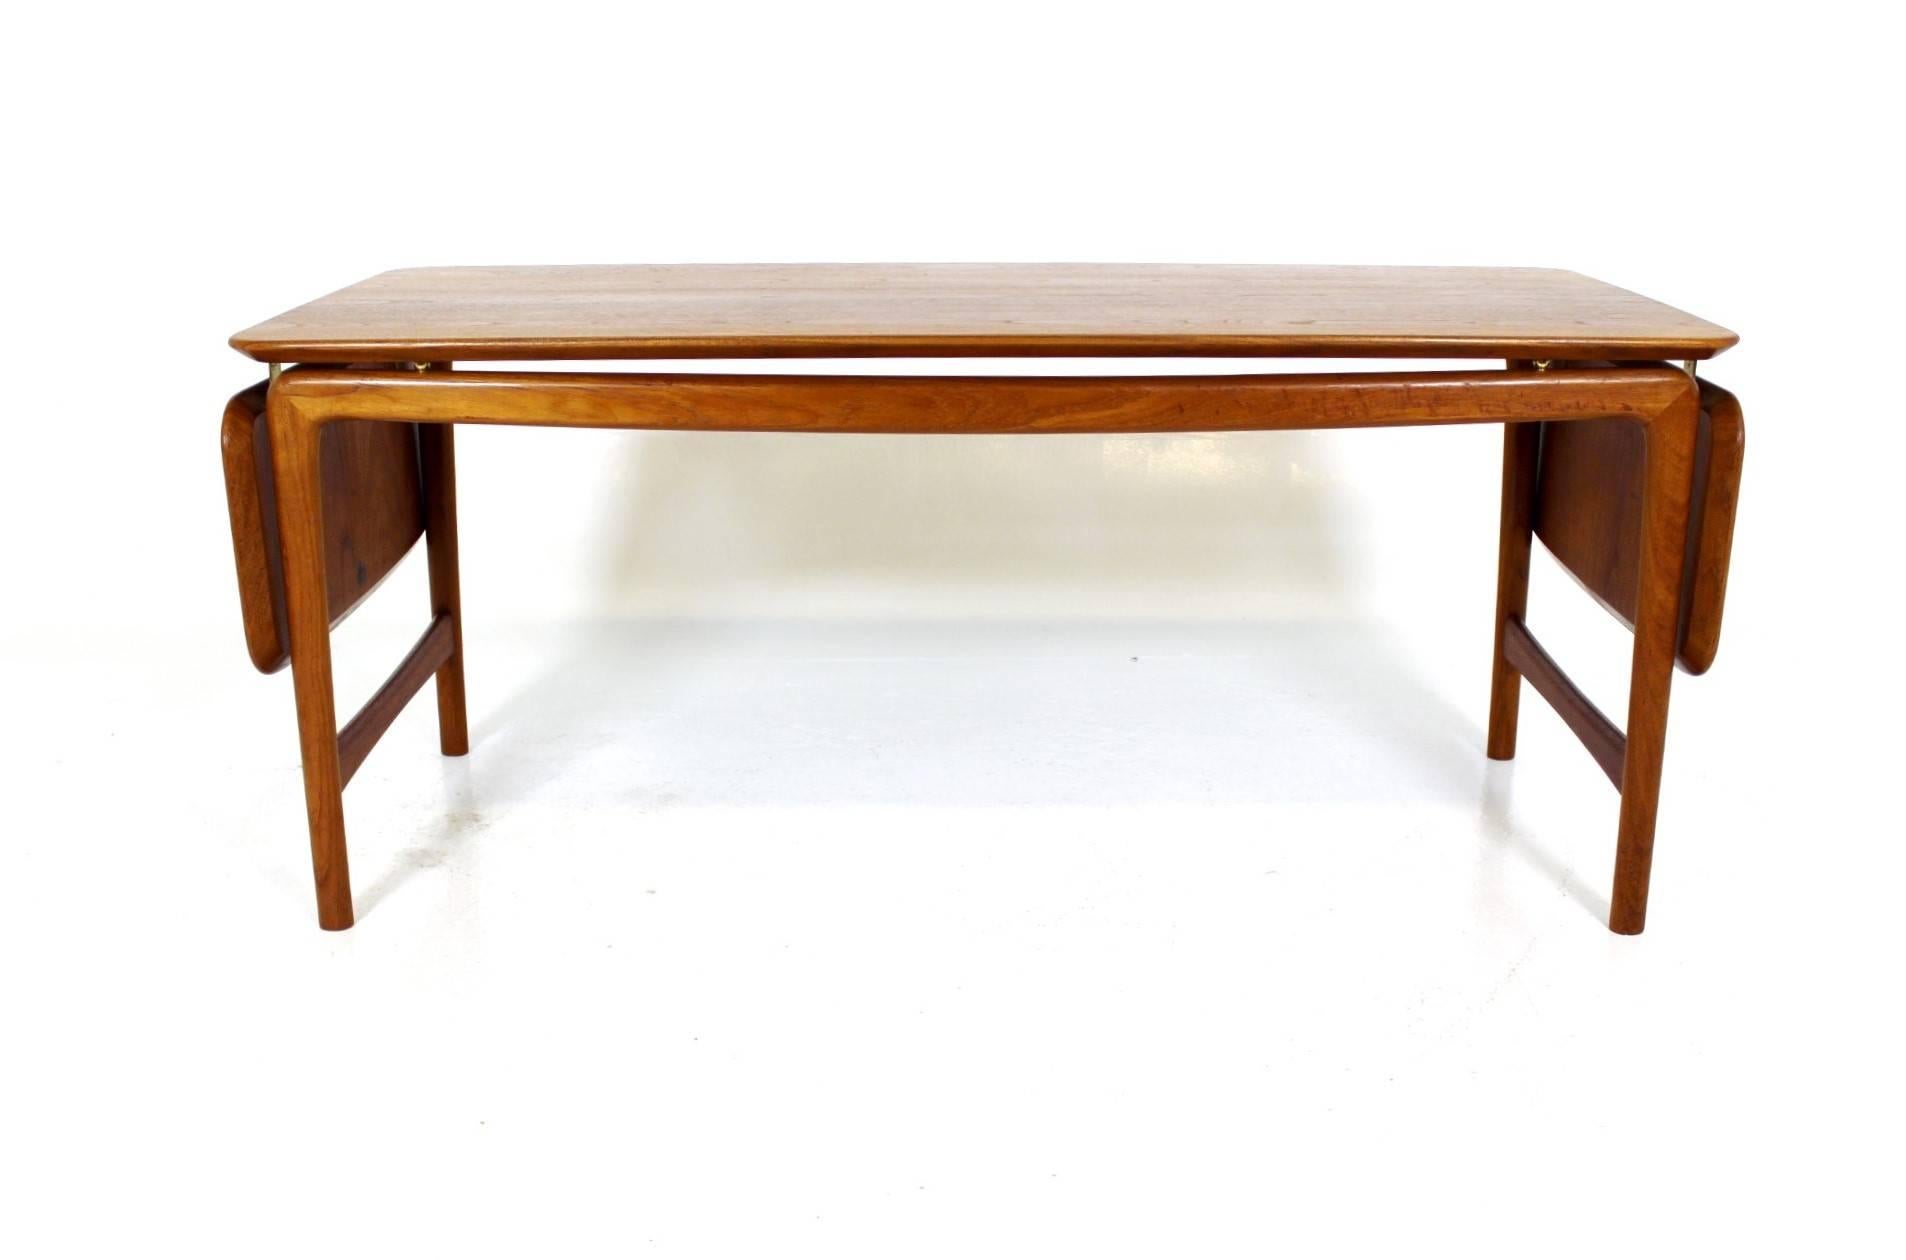 Teak coffee table designed by Peter Hvidt & Orla Mølgaard Nielsen for by France & Daverkosen in the 1950s. This coffee table is made from solid teak wood with foldable side leaves and brass hardware.
Measures: W= 129 +26.5 +26.5 = 182 cm
D=